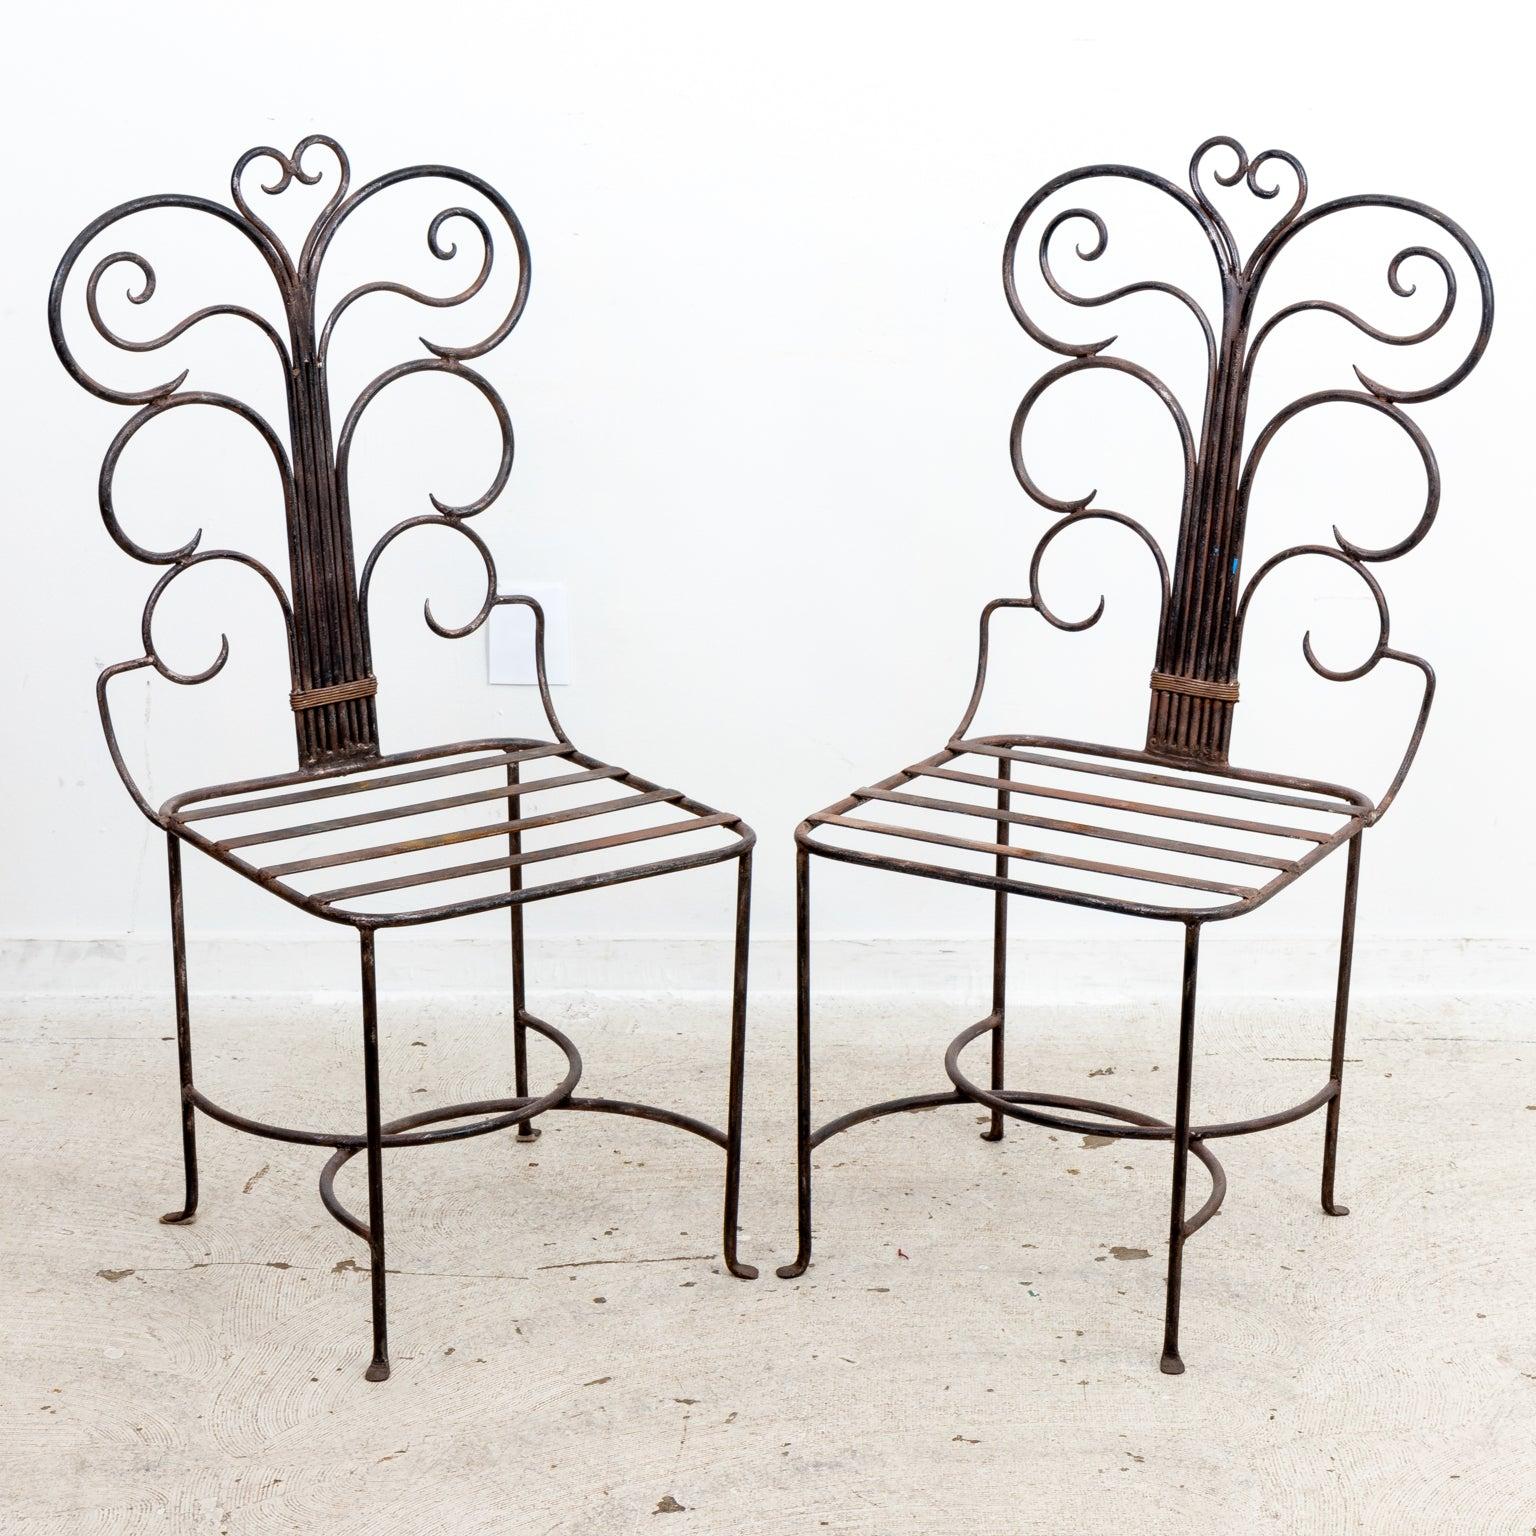 Set of four wrought iron scroll back chairs in the French style with 
straight backs designed with central support, branching out in swooping 
arch forms. The seats feature an open iron slat design ready to support a
 loose or fixed cushion.